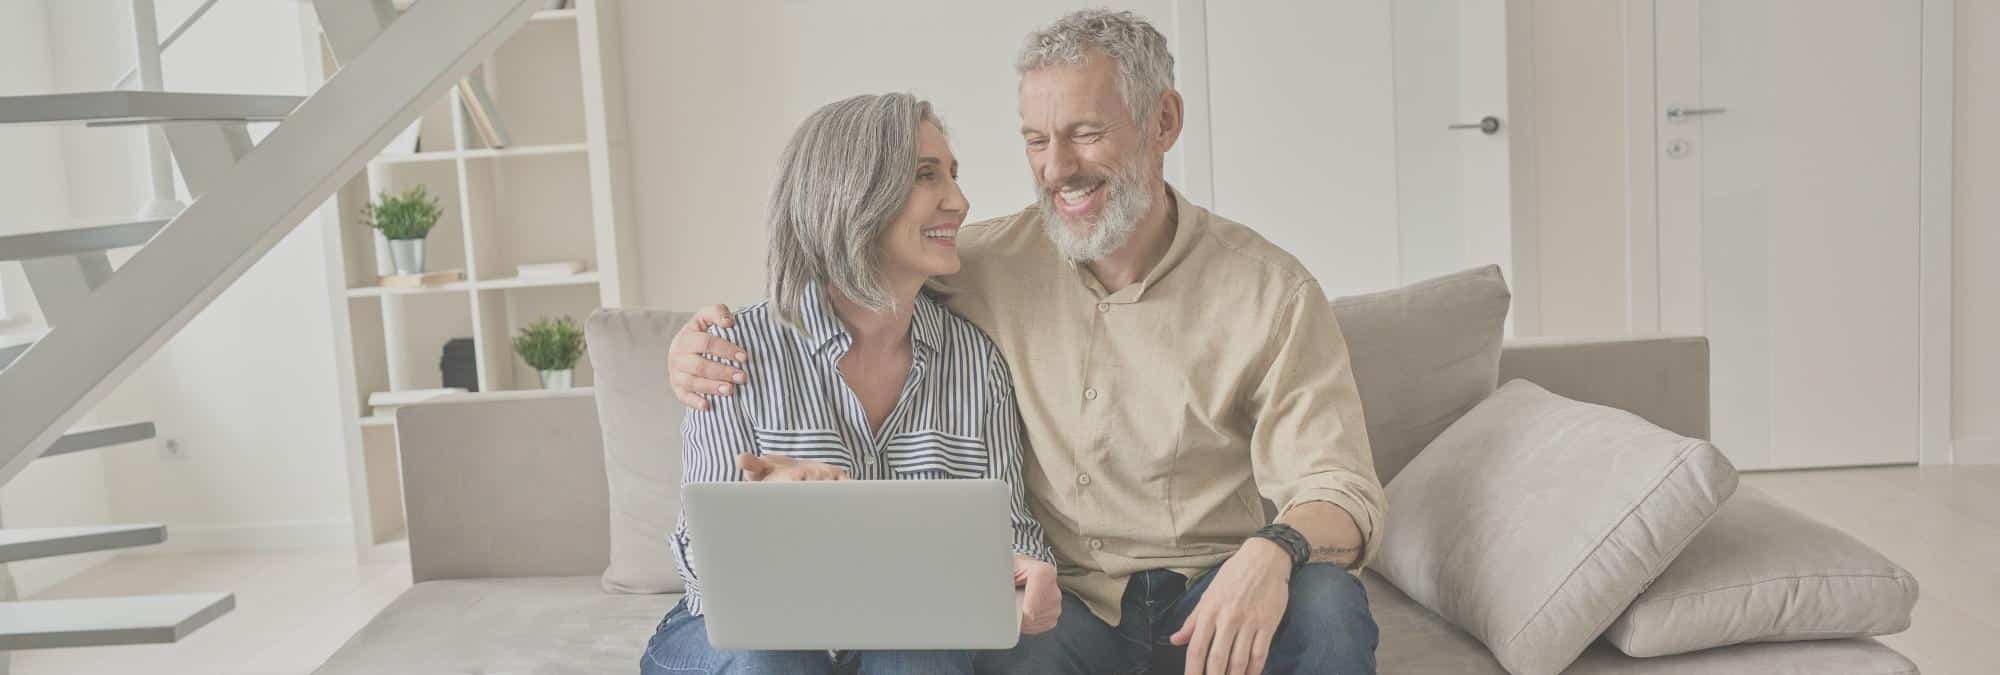 Mature couple senior couple sitting on couch looking at laptop at home talking downsize house